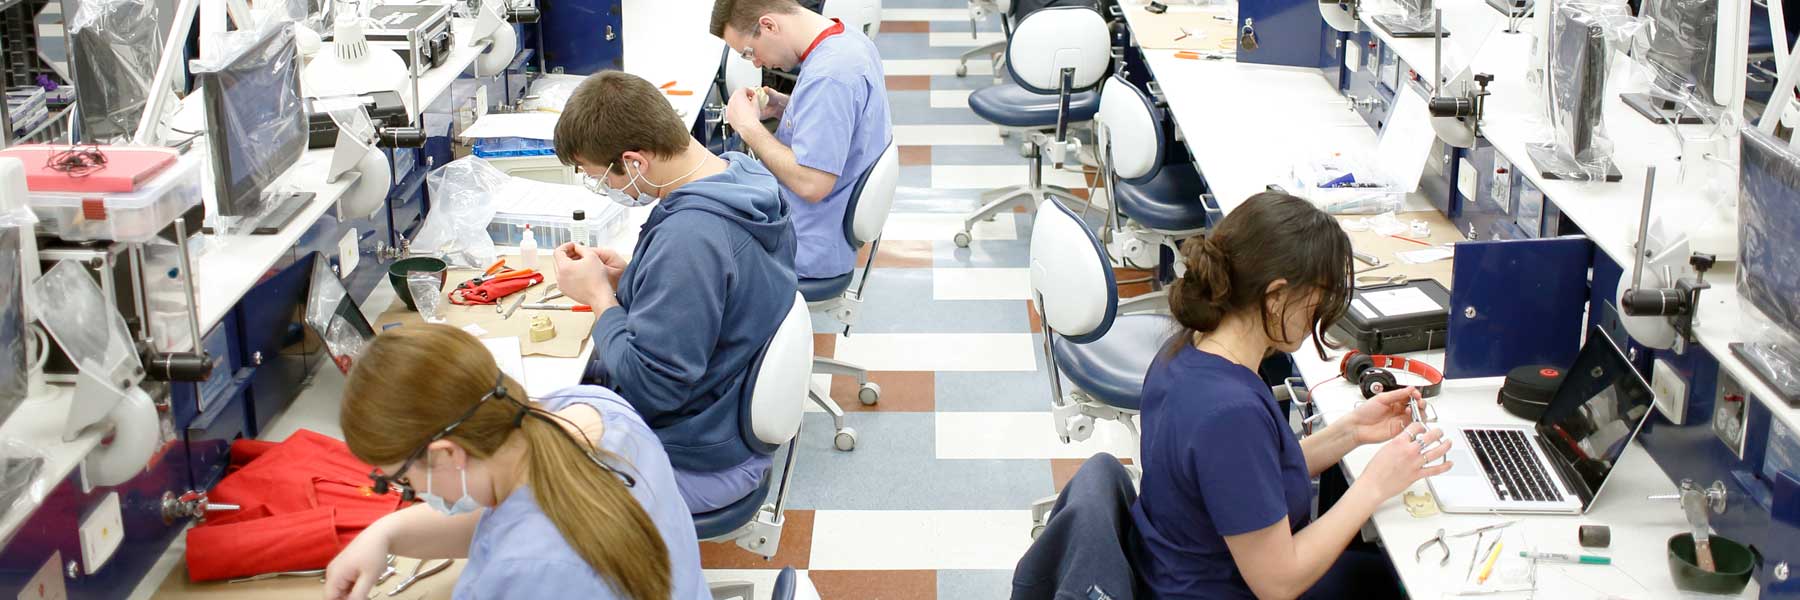 Dentistry students practice using dental tools at research lab stations.